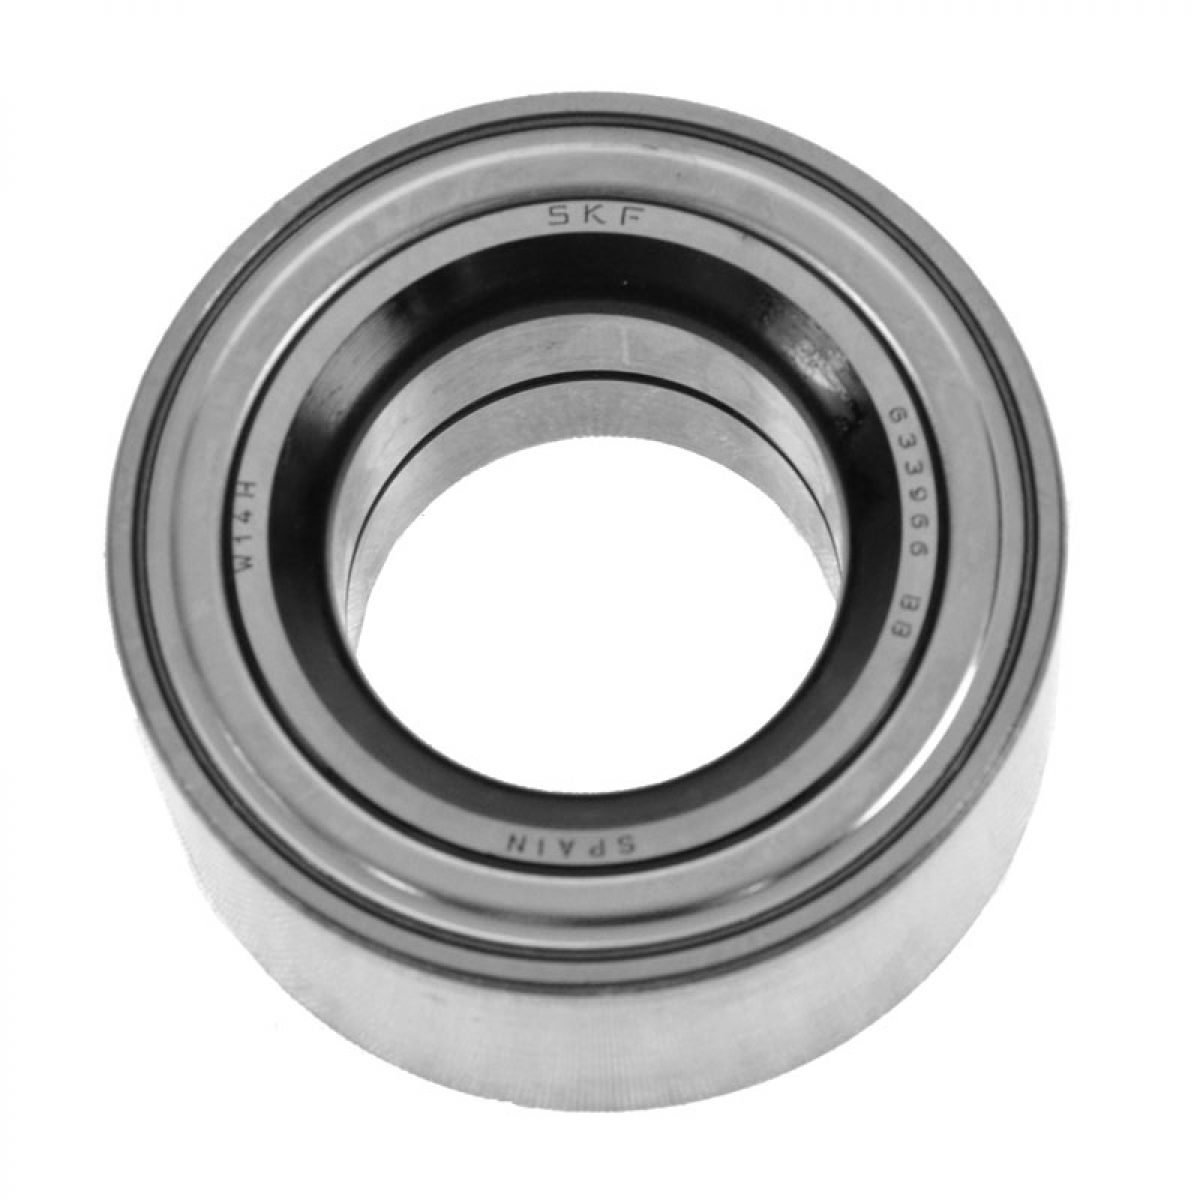 Ford contour front wheel bearings #8